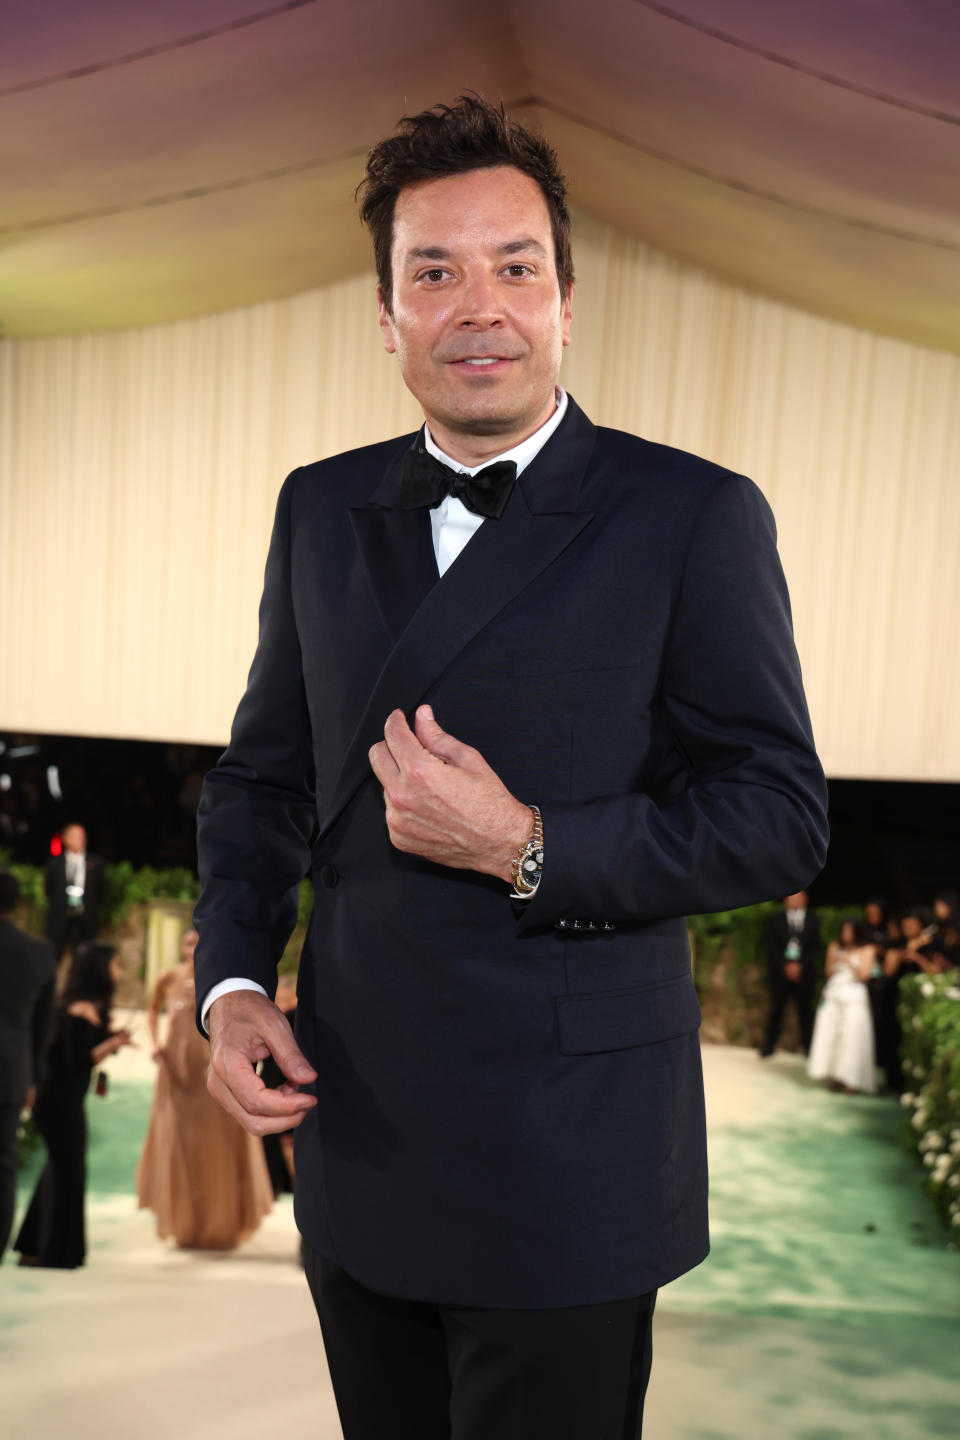 Jimmy Fallon standing in a suit with a bow tie at an event